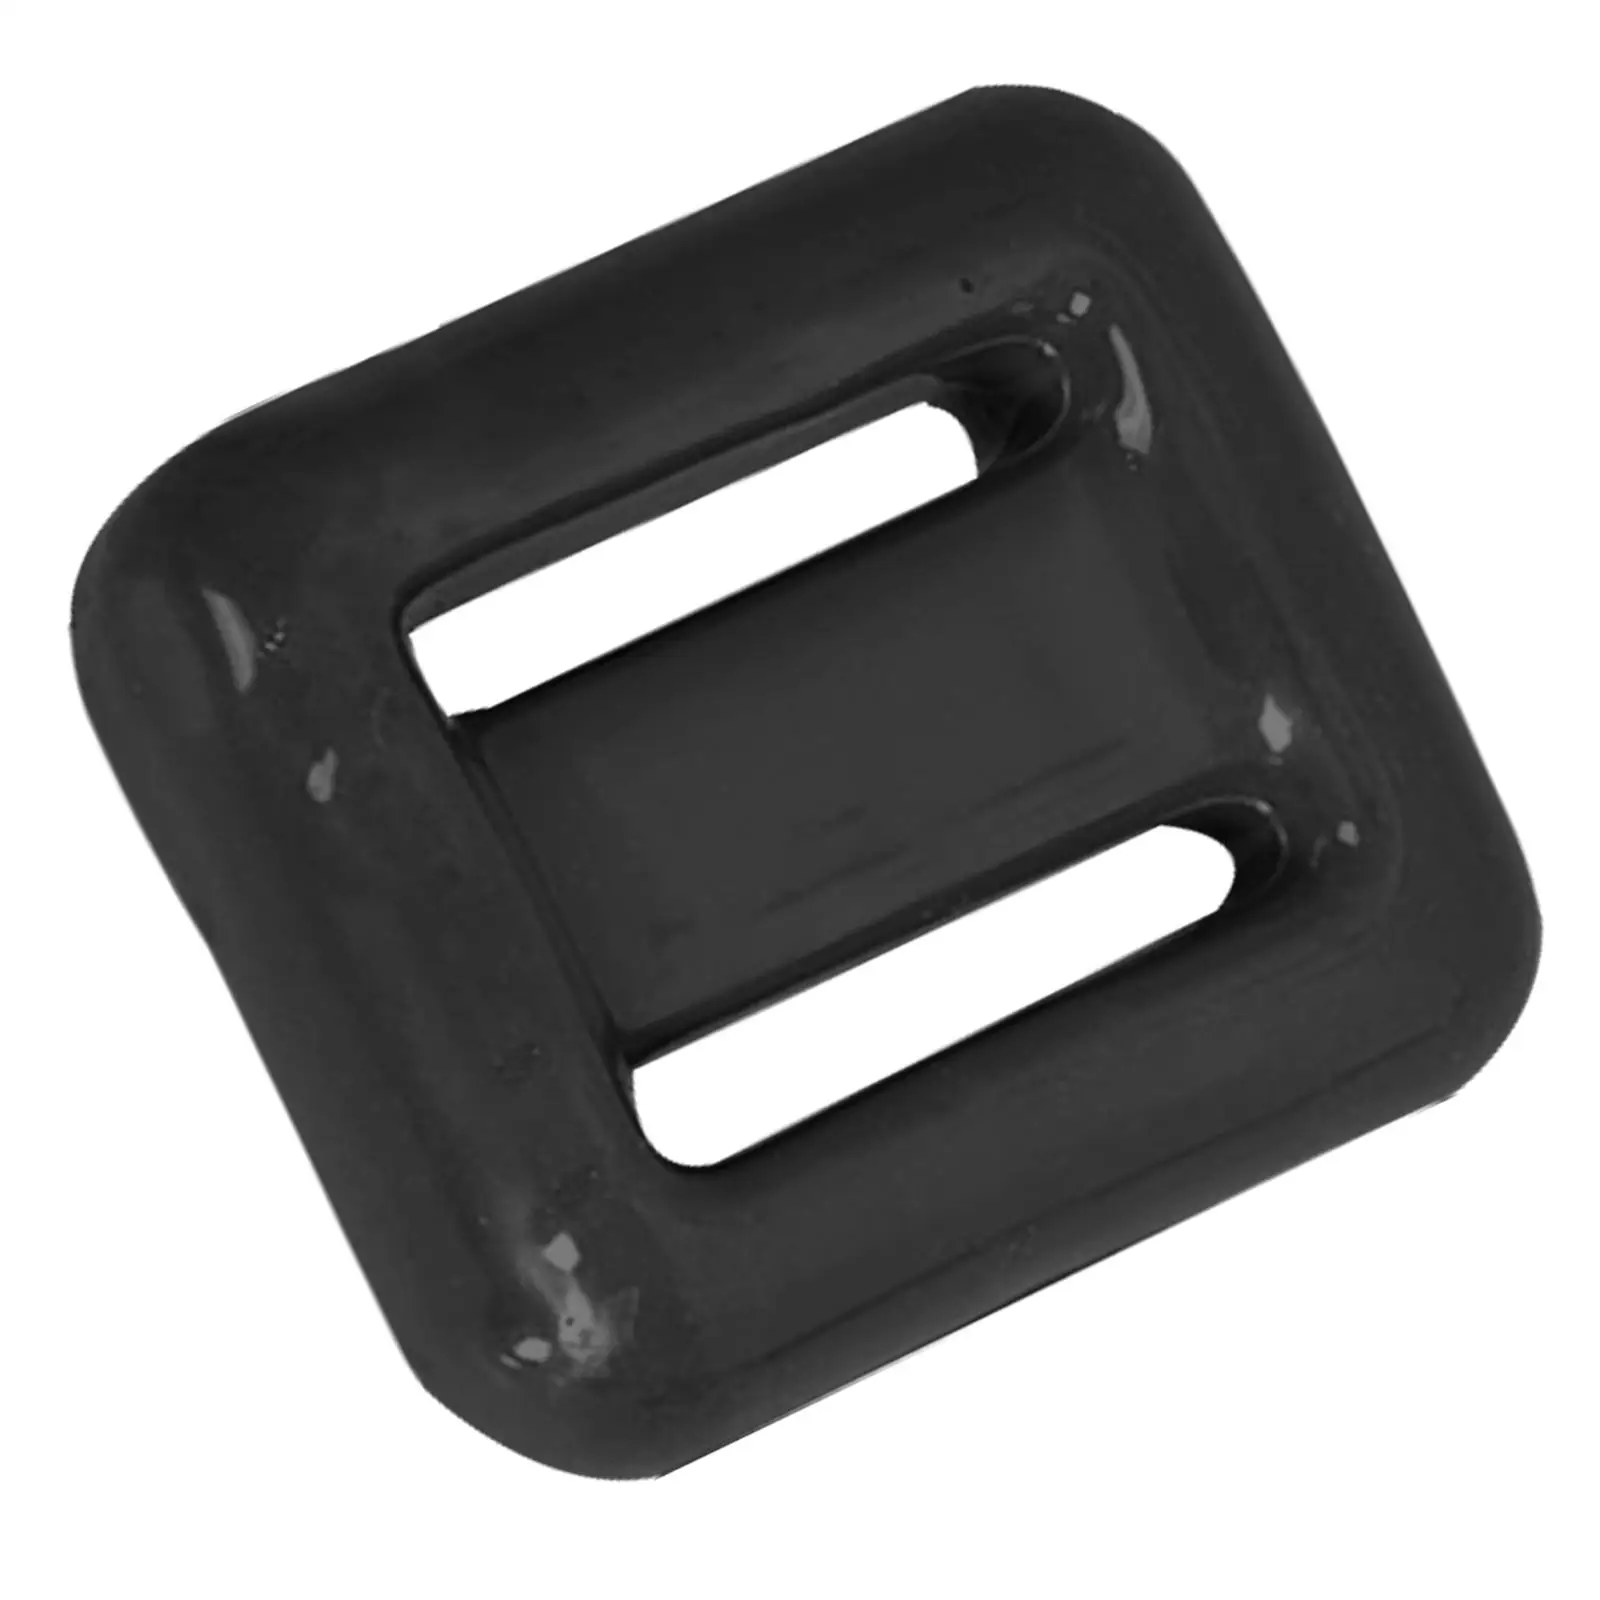 Solid Scuba Weights 0.5kg to 1.5kg PVC Equipment Counterweight Non Slip Parts